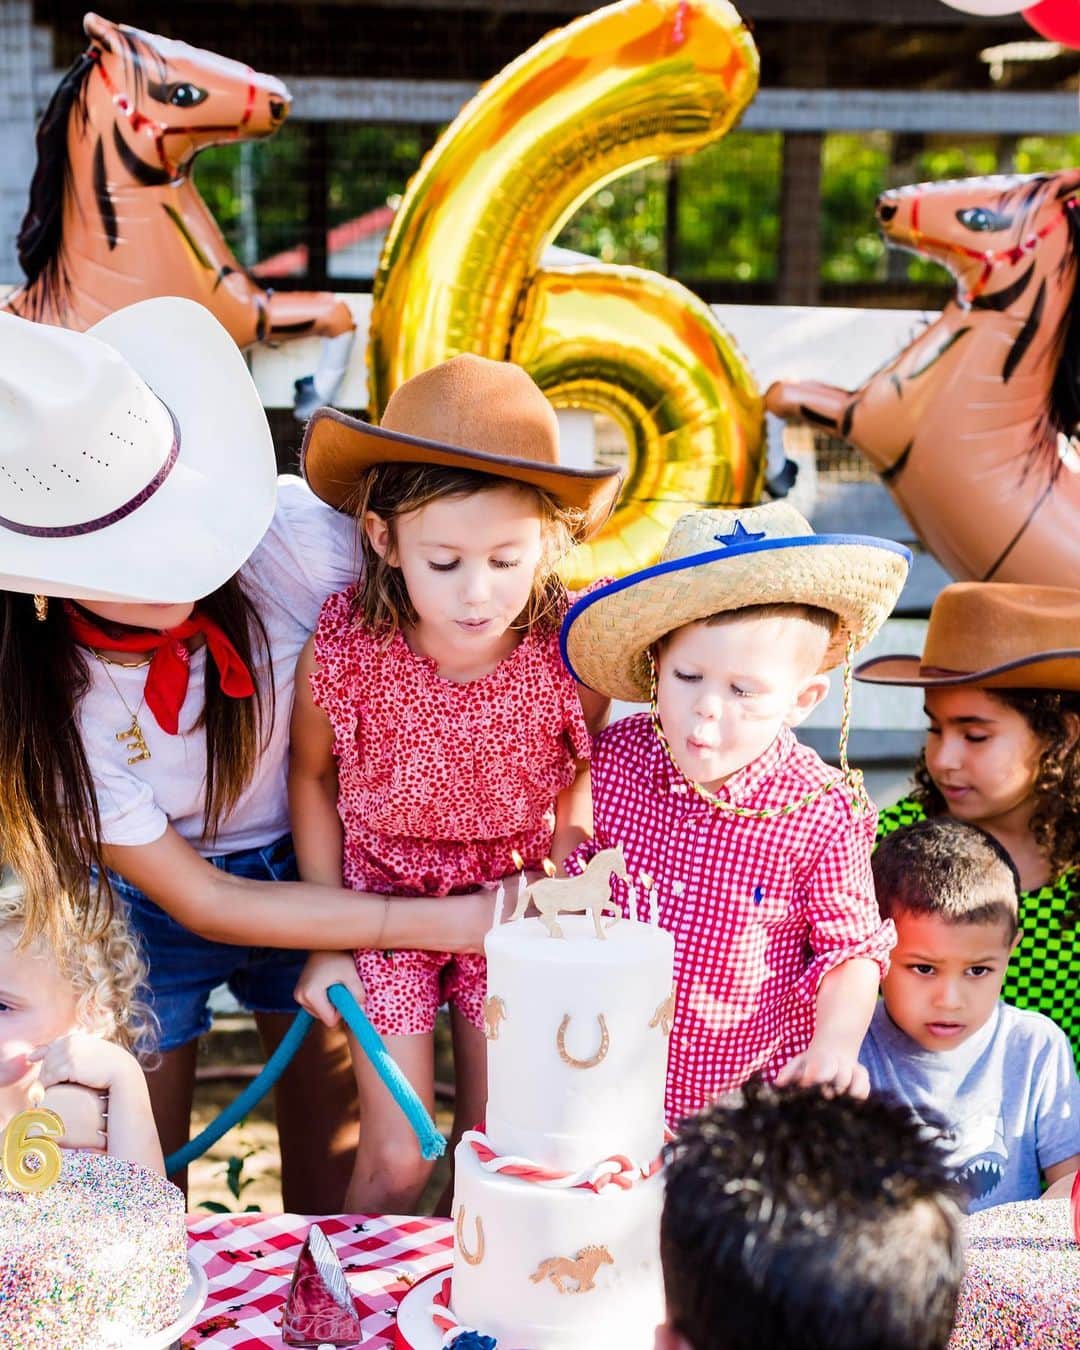 Elizabeth Chambers Hammerのインスタグラム：「✨S I X ✨ Pony rides, farm animals, apple bobbing, pie tossing, chicken feeding, two-stepping and the most delicious cowboy bbq in honor of our extraordinary Hops. It was a fulll bday week, but wouldn’t have it any other way. A mill more photos to come, bc @lisareid_photography fully captured the magic per usual. Happy Birthday, Hopsey! 🐴🎂🎈」